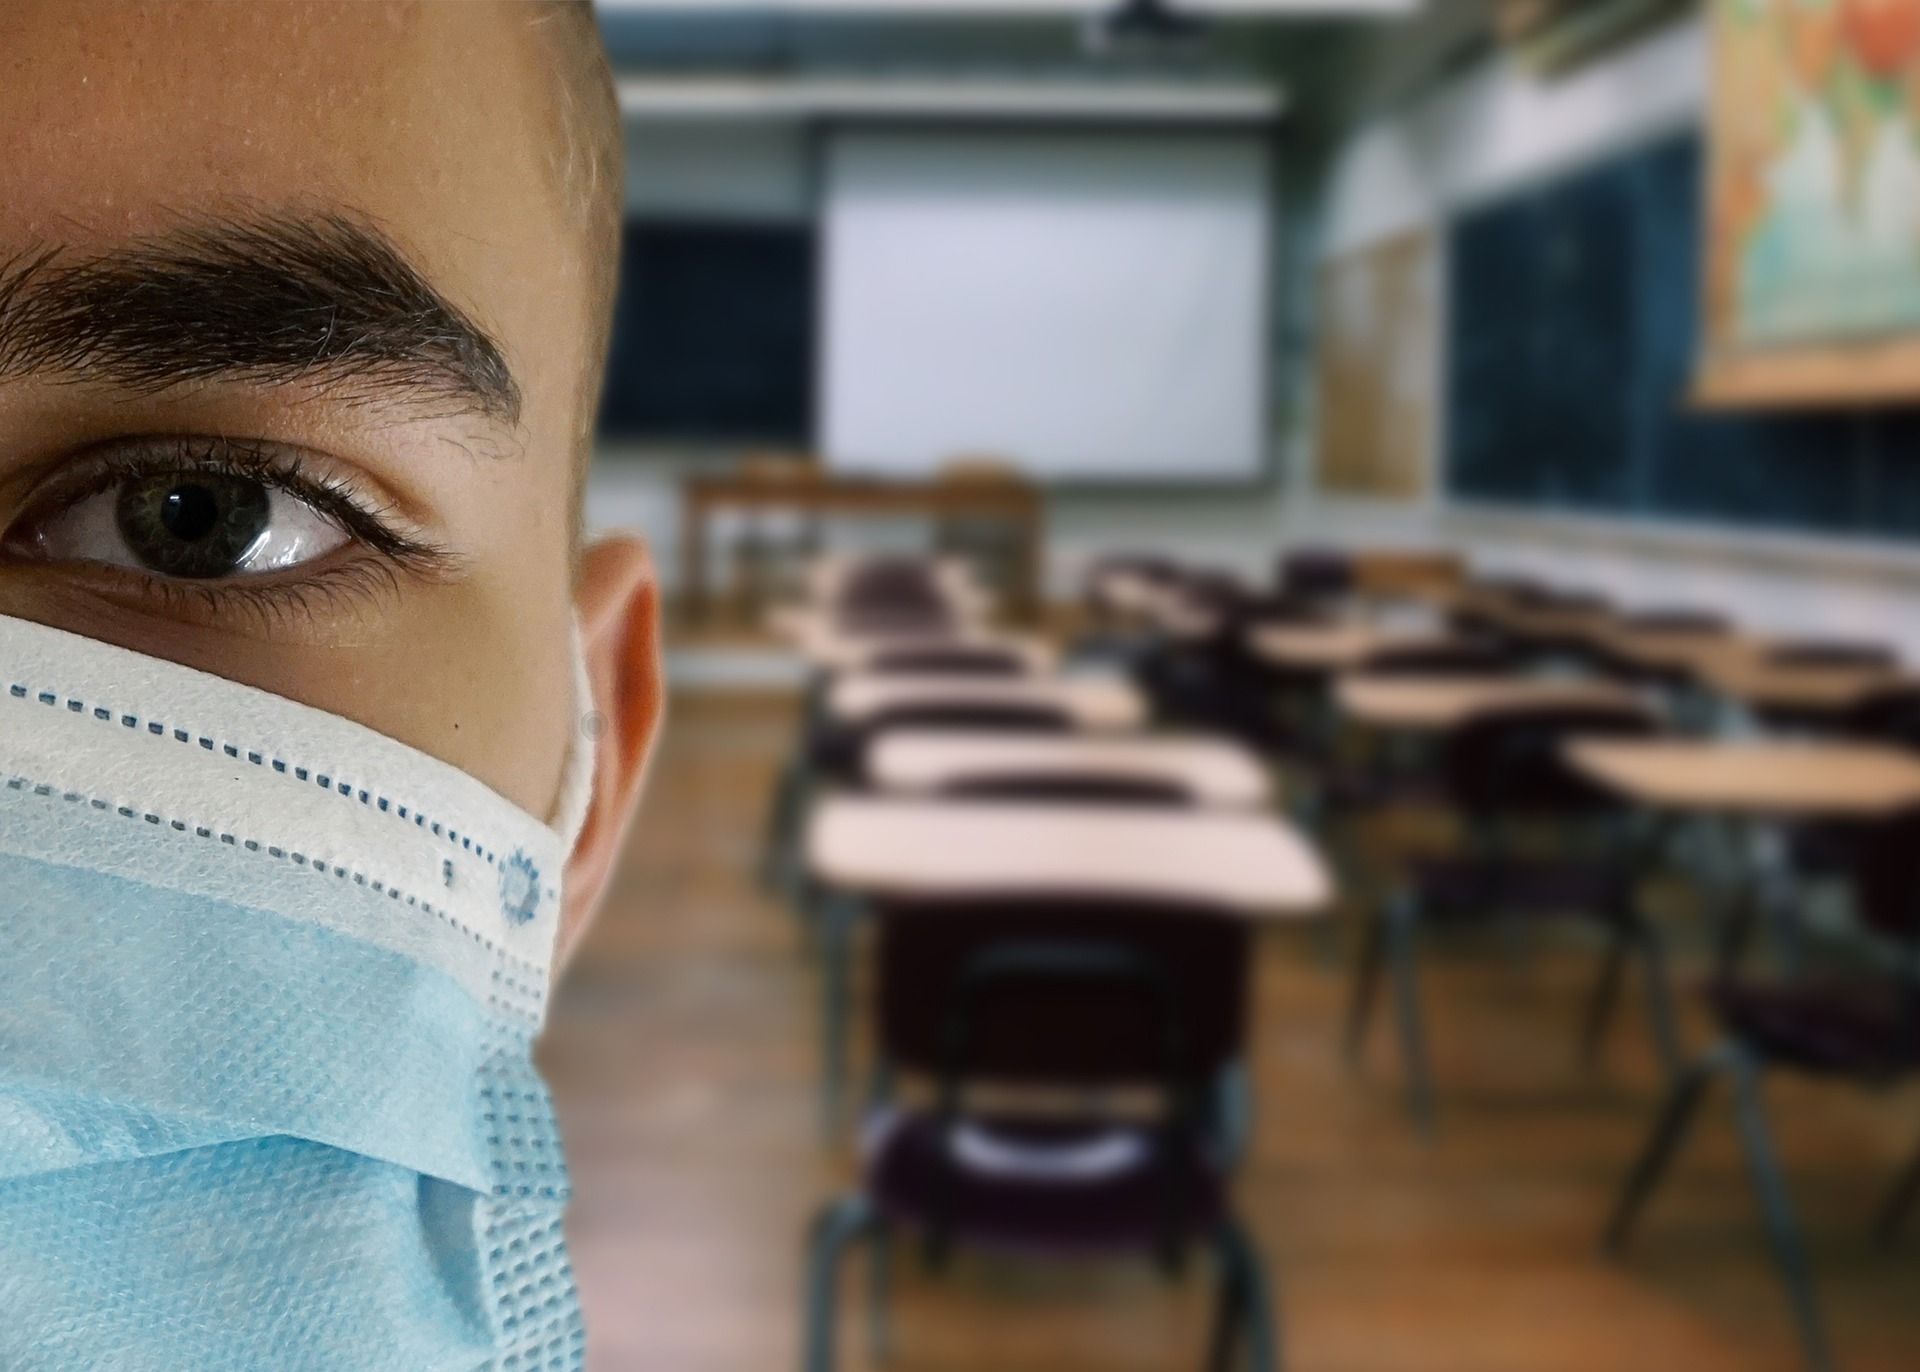 Students in England to wear masks in classroom to curb omicron spread